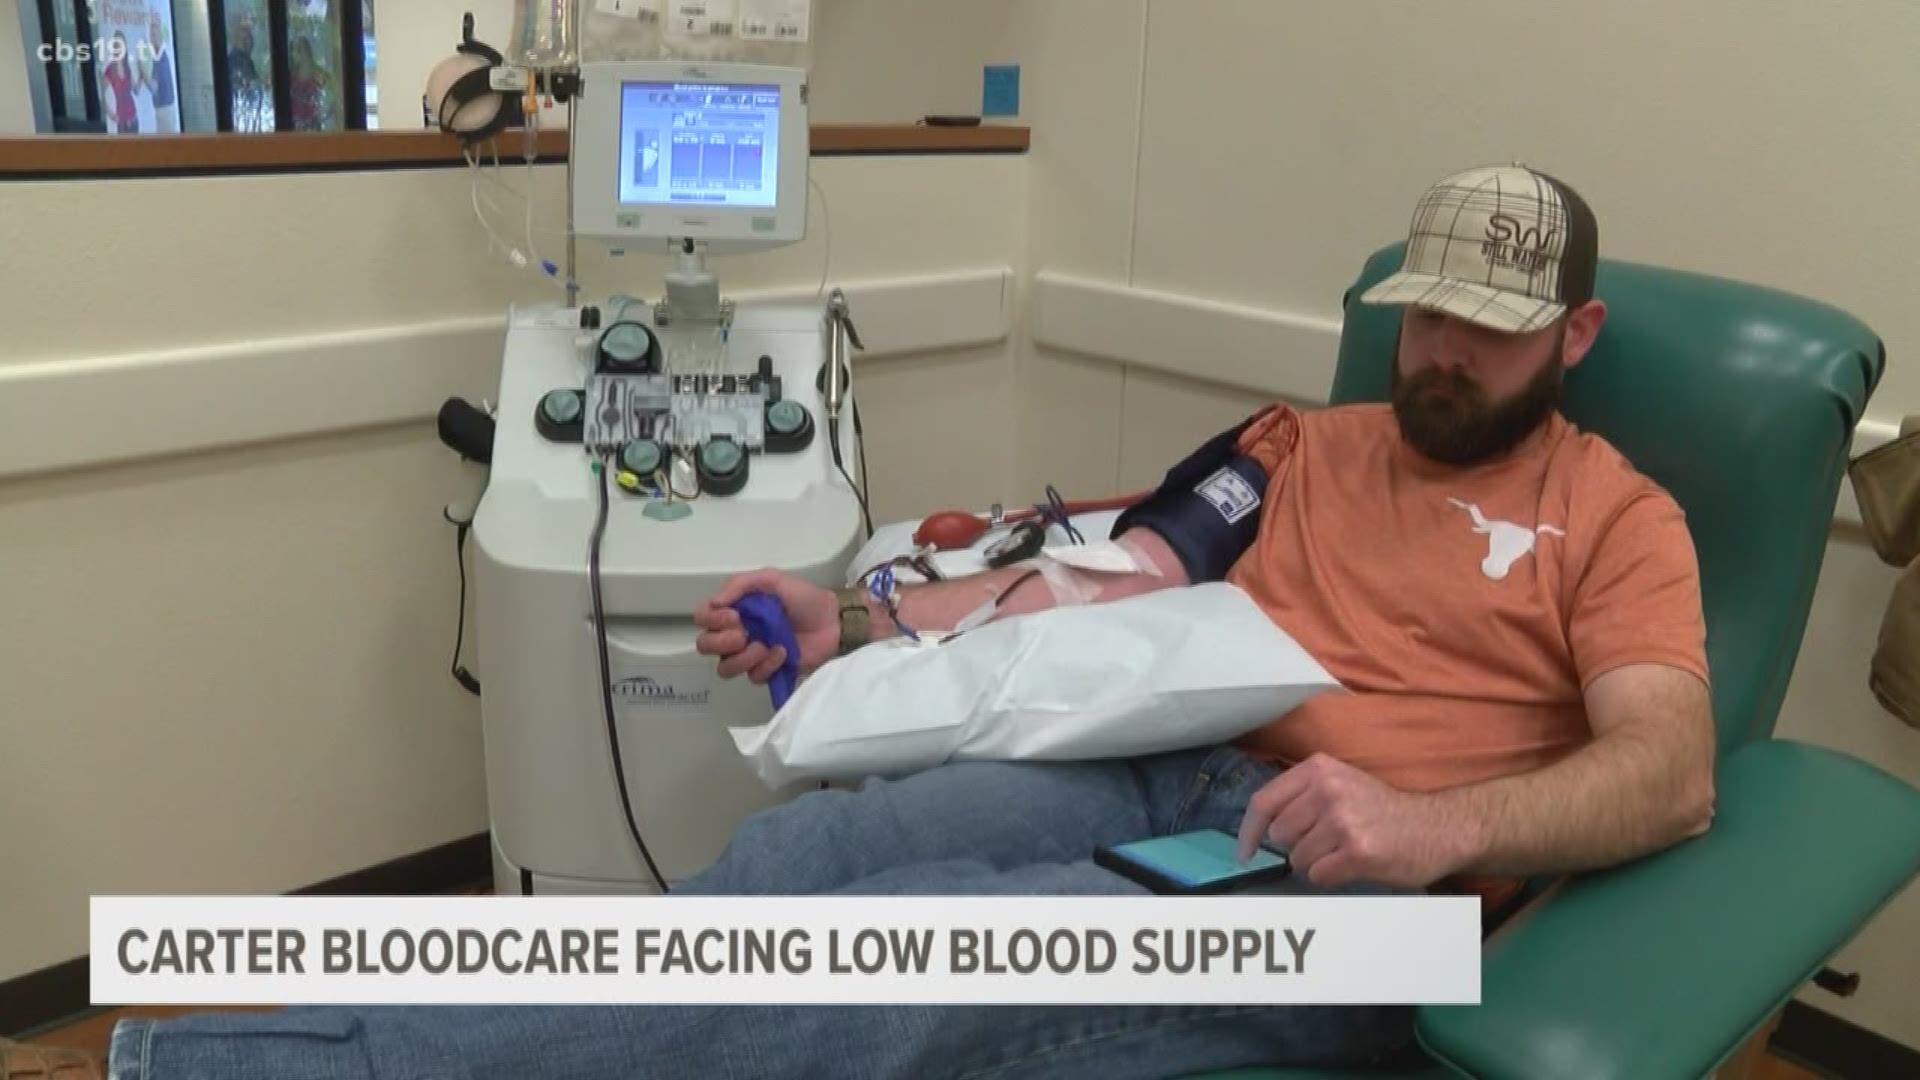 Carter Bloodcare says the usual donors are aging, and they need help from younger donors.